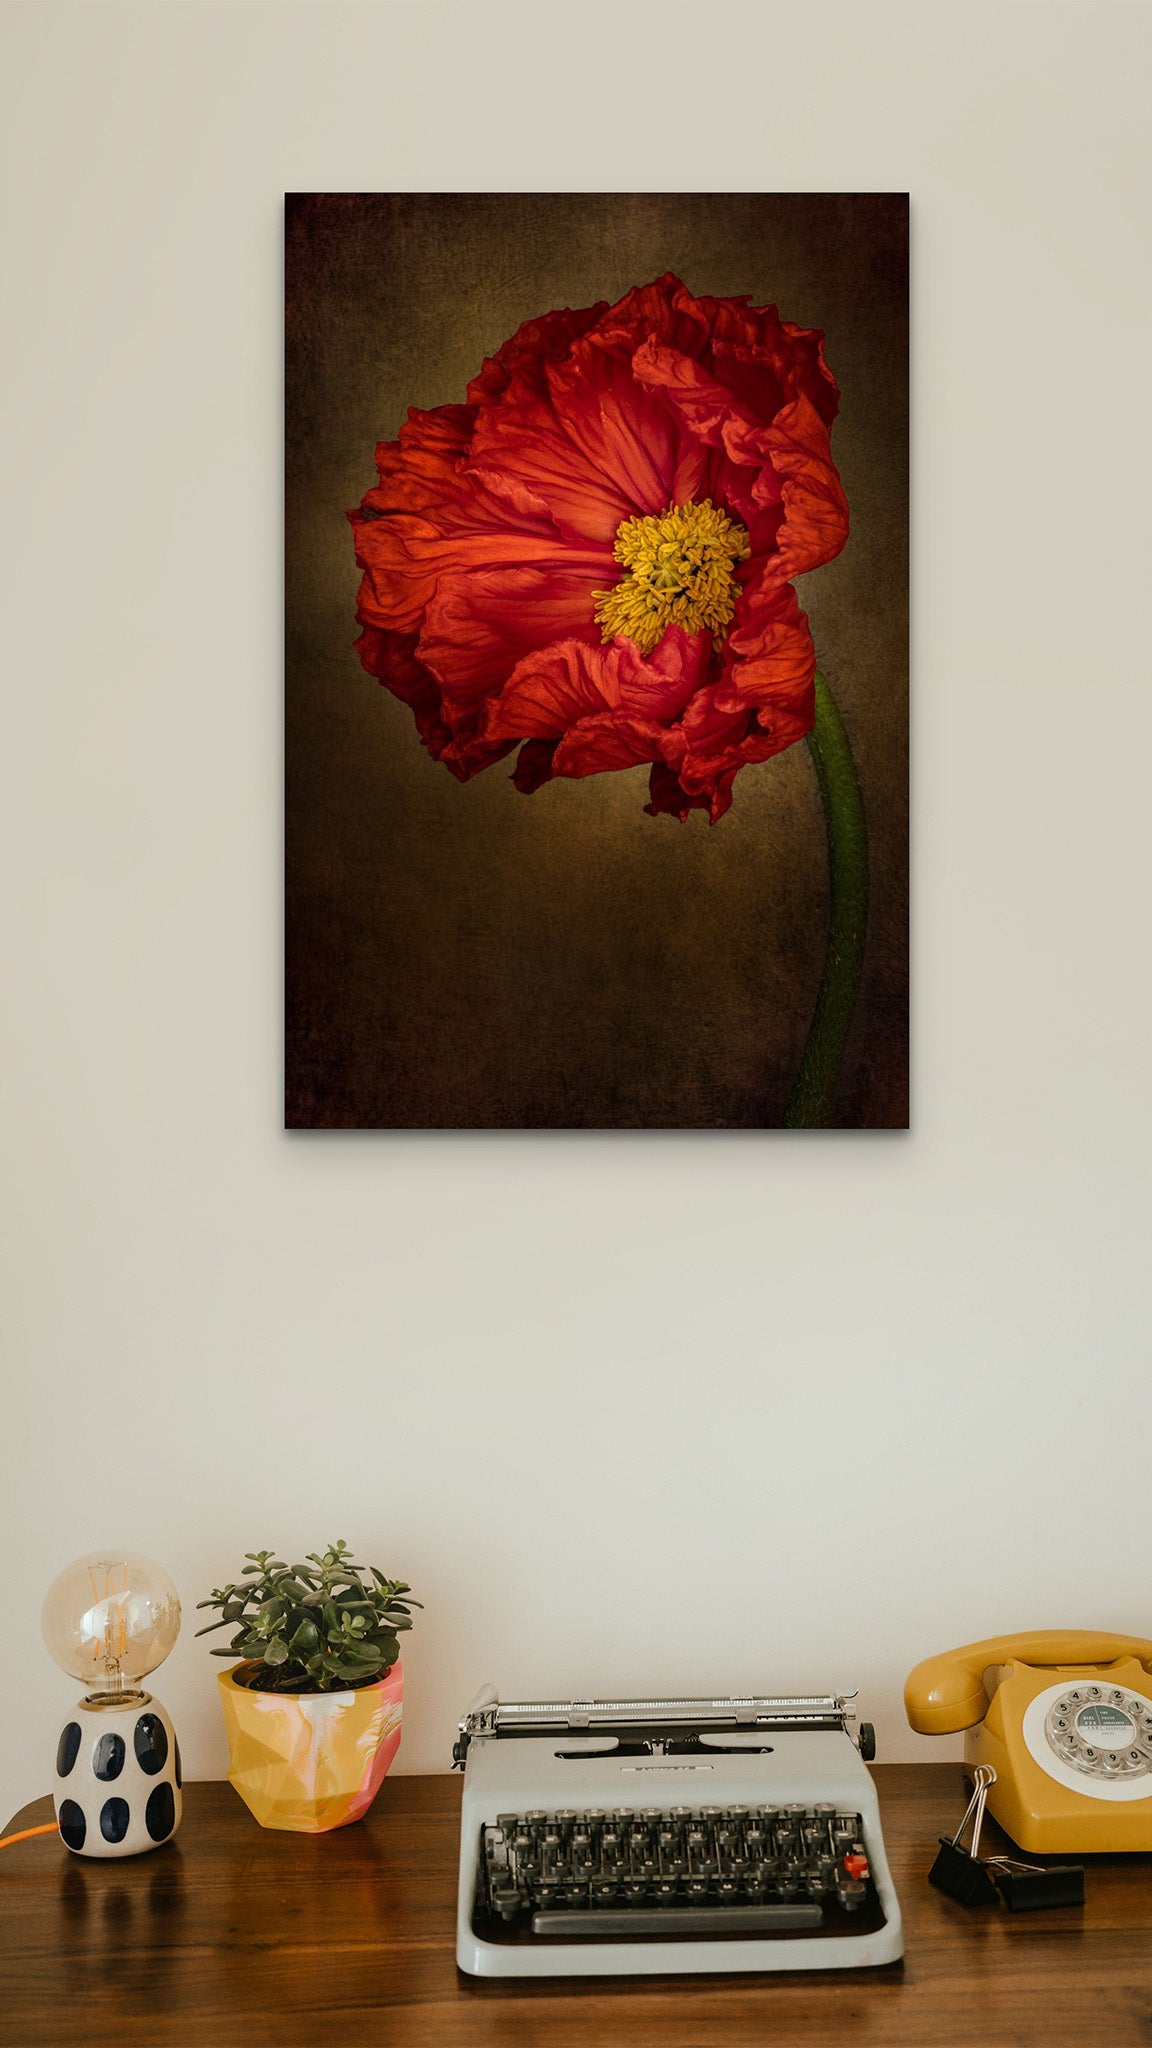 Picture hanging on the wall of a room. There is a desk with a typewriter. The picture is a fine art flower photography titled "Confidence" by Dreaux Fine Art. 